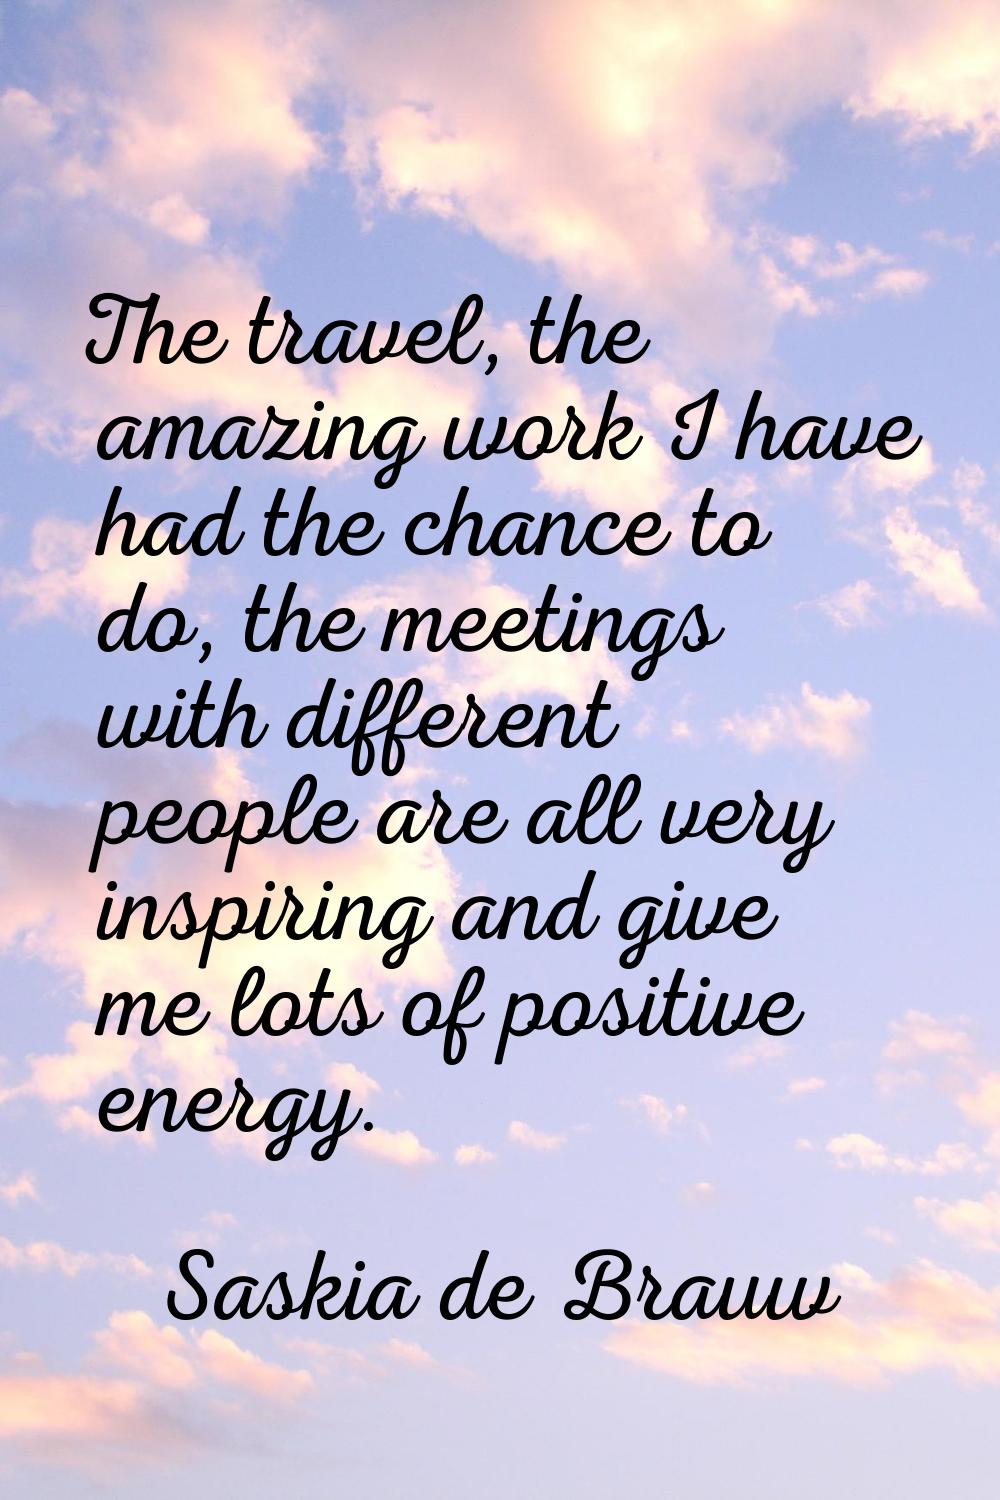 The travel, the amazing work I have had the chance to do, the meetings with different people are al